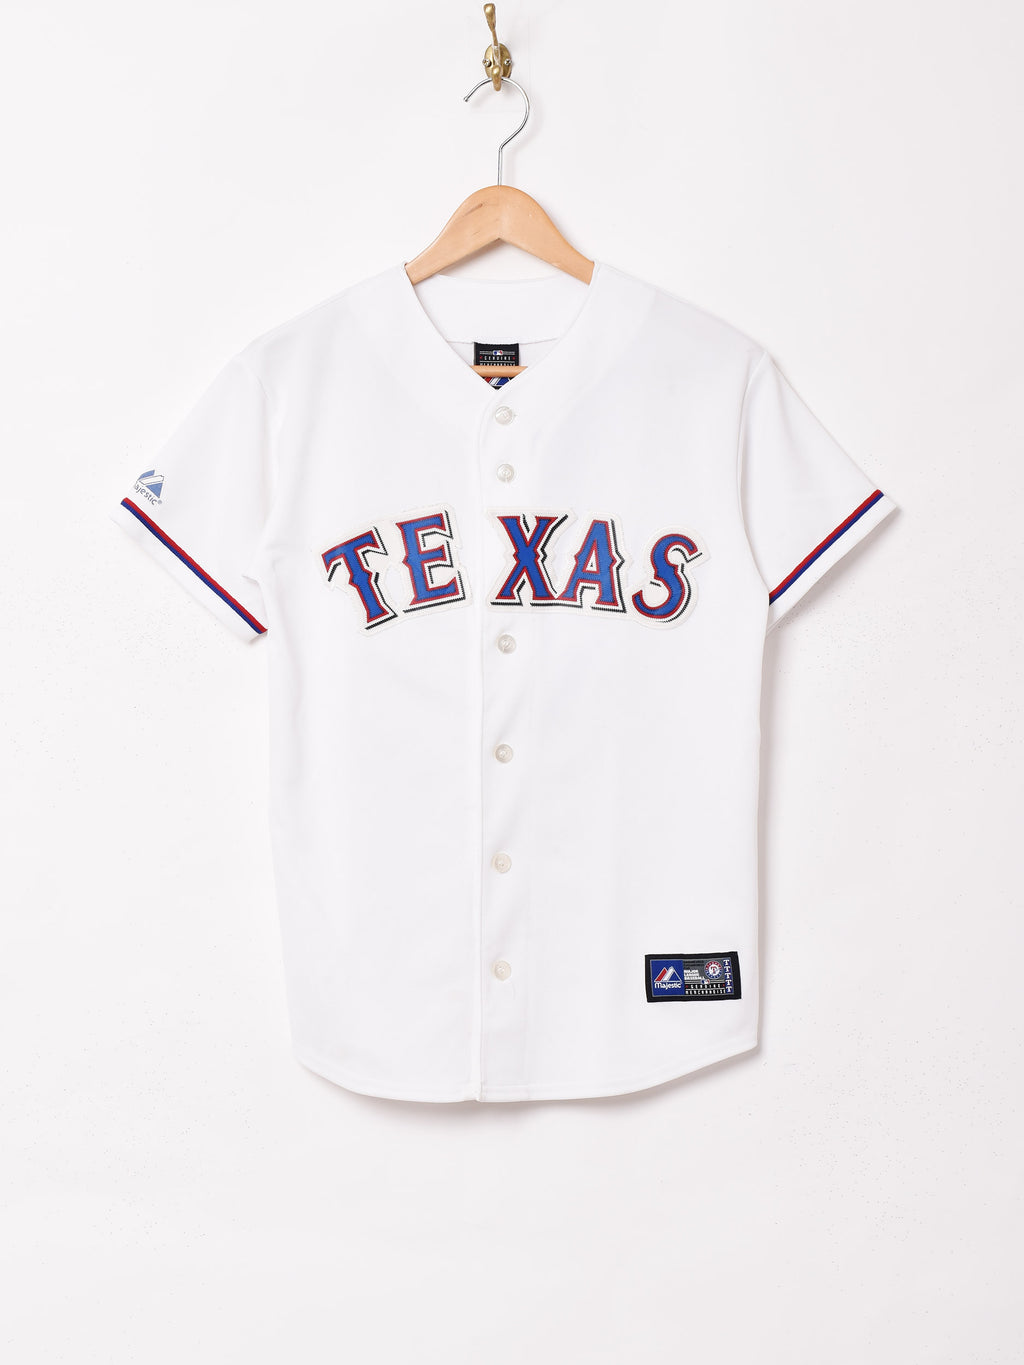 MLB Texas Rangers T Shirt Adult Size Large Red Crew Neck Short Sleeve Tee  海外 即決 - スキル、知識